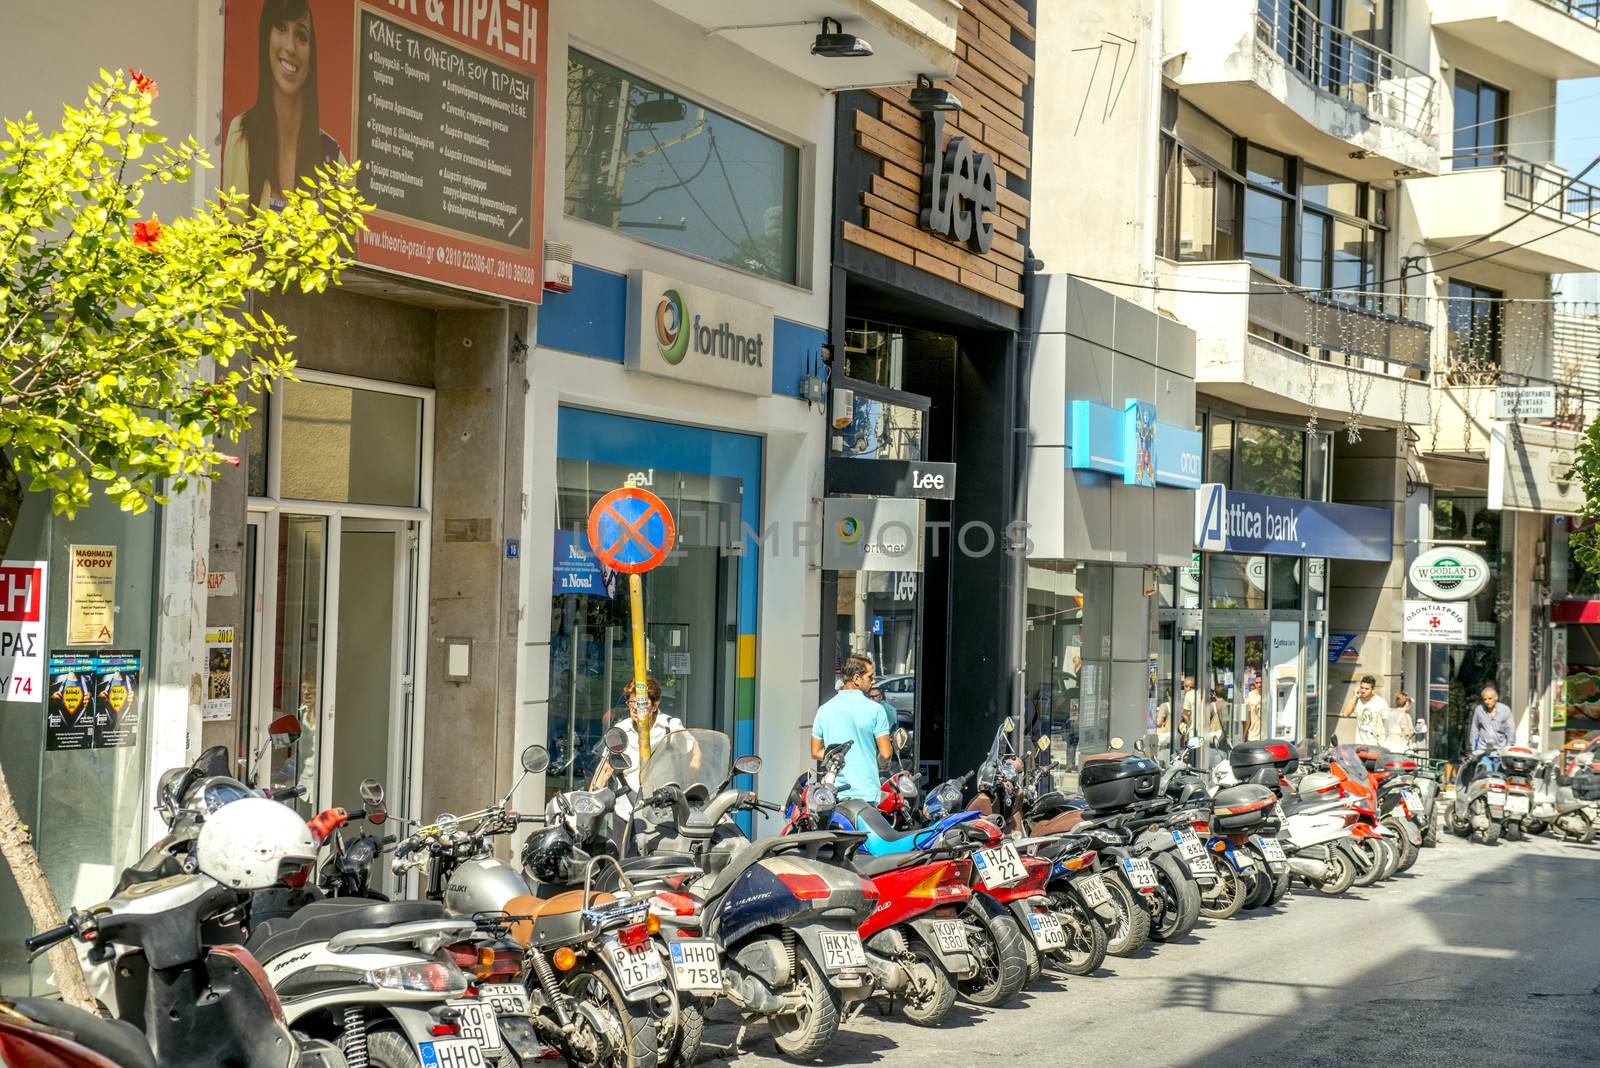 Scooters in Heraklion, Creece by Alenmax